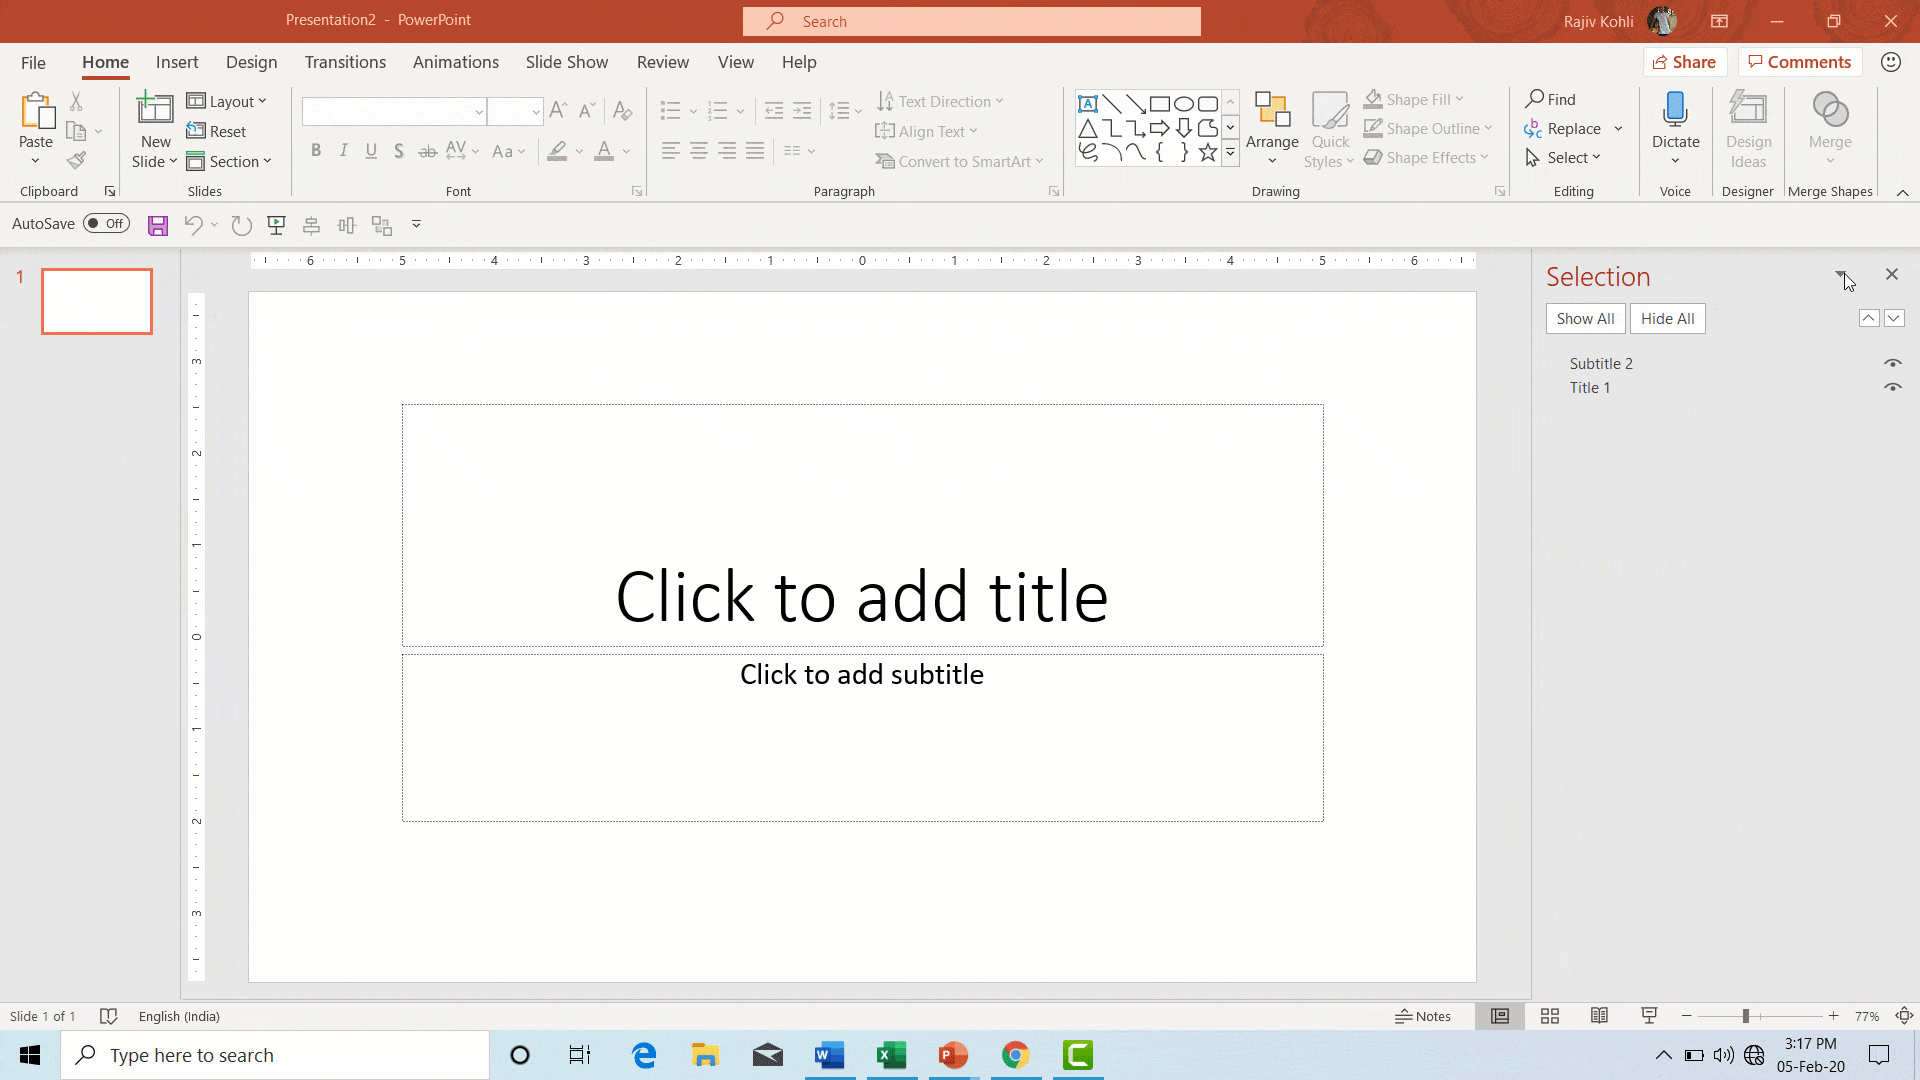 How To Move Selection Pane in Microsoft PowerPoint